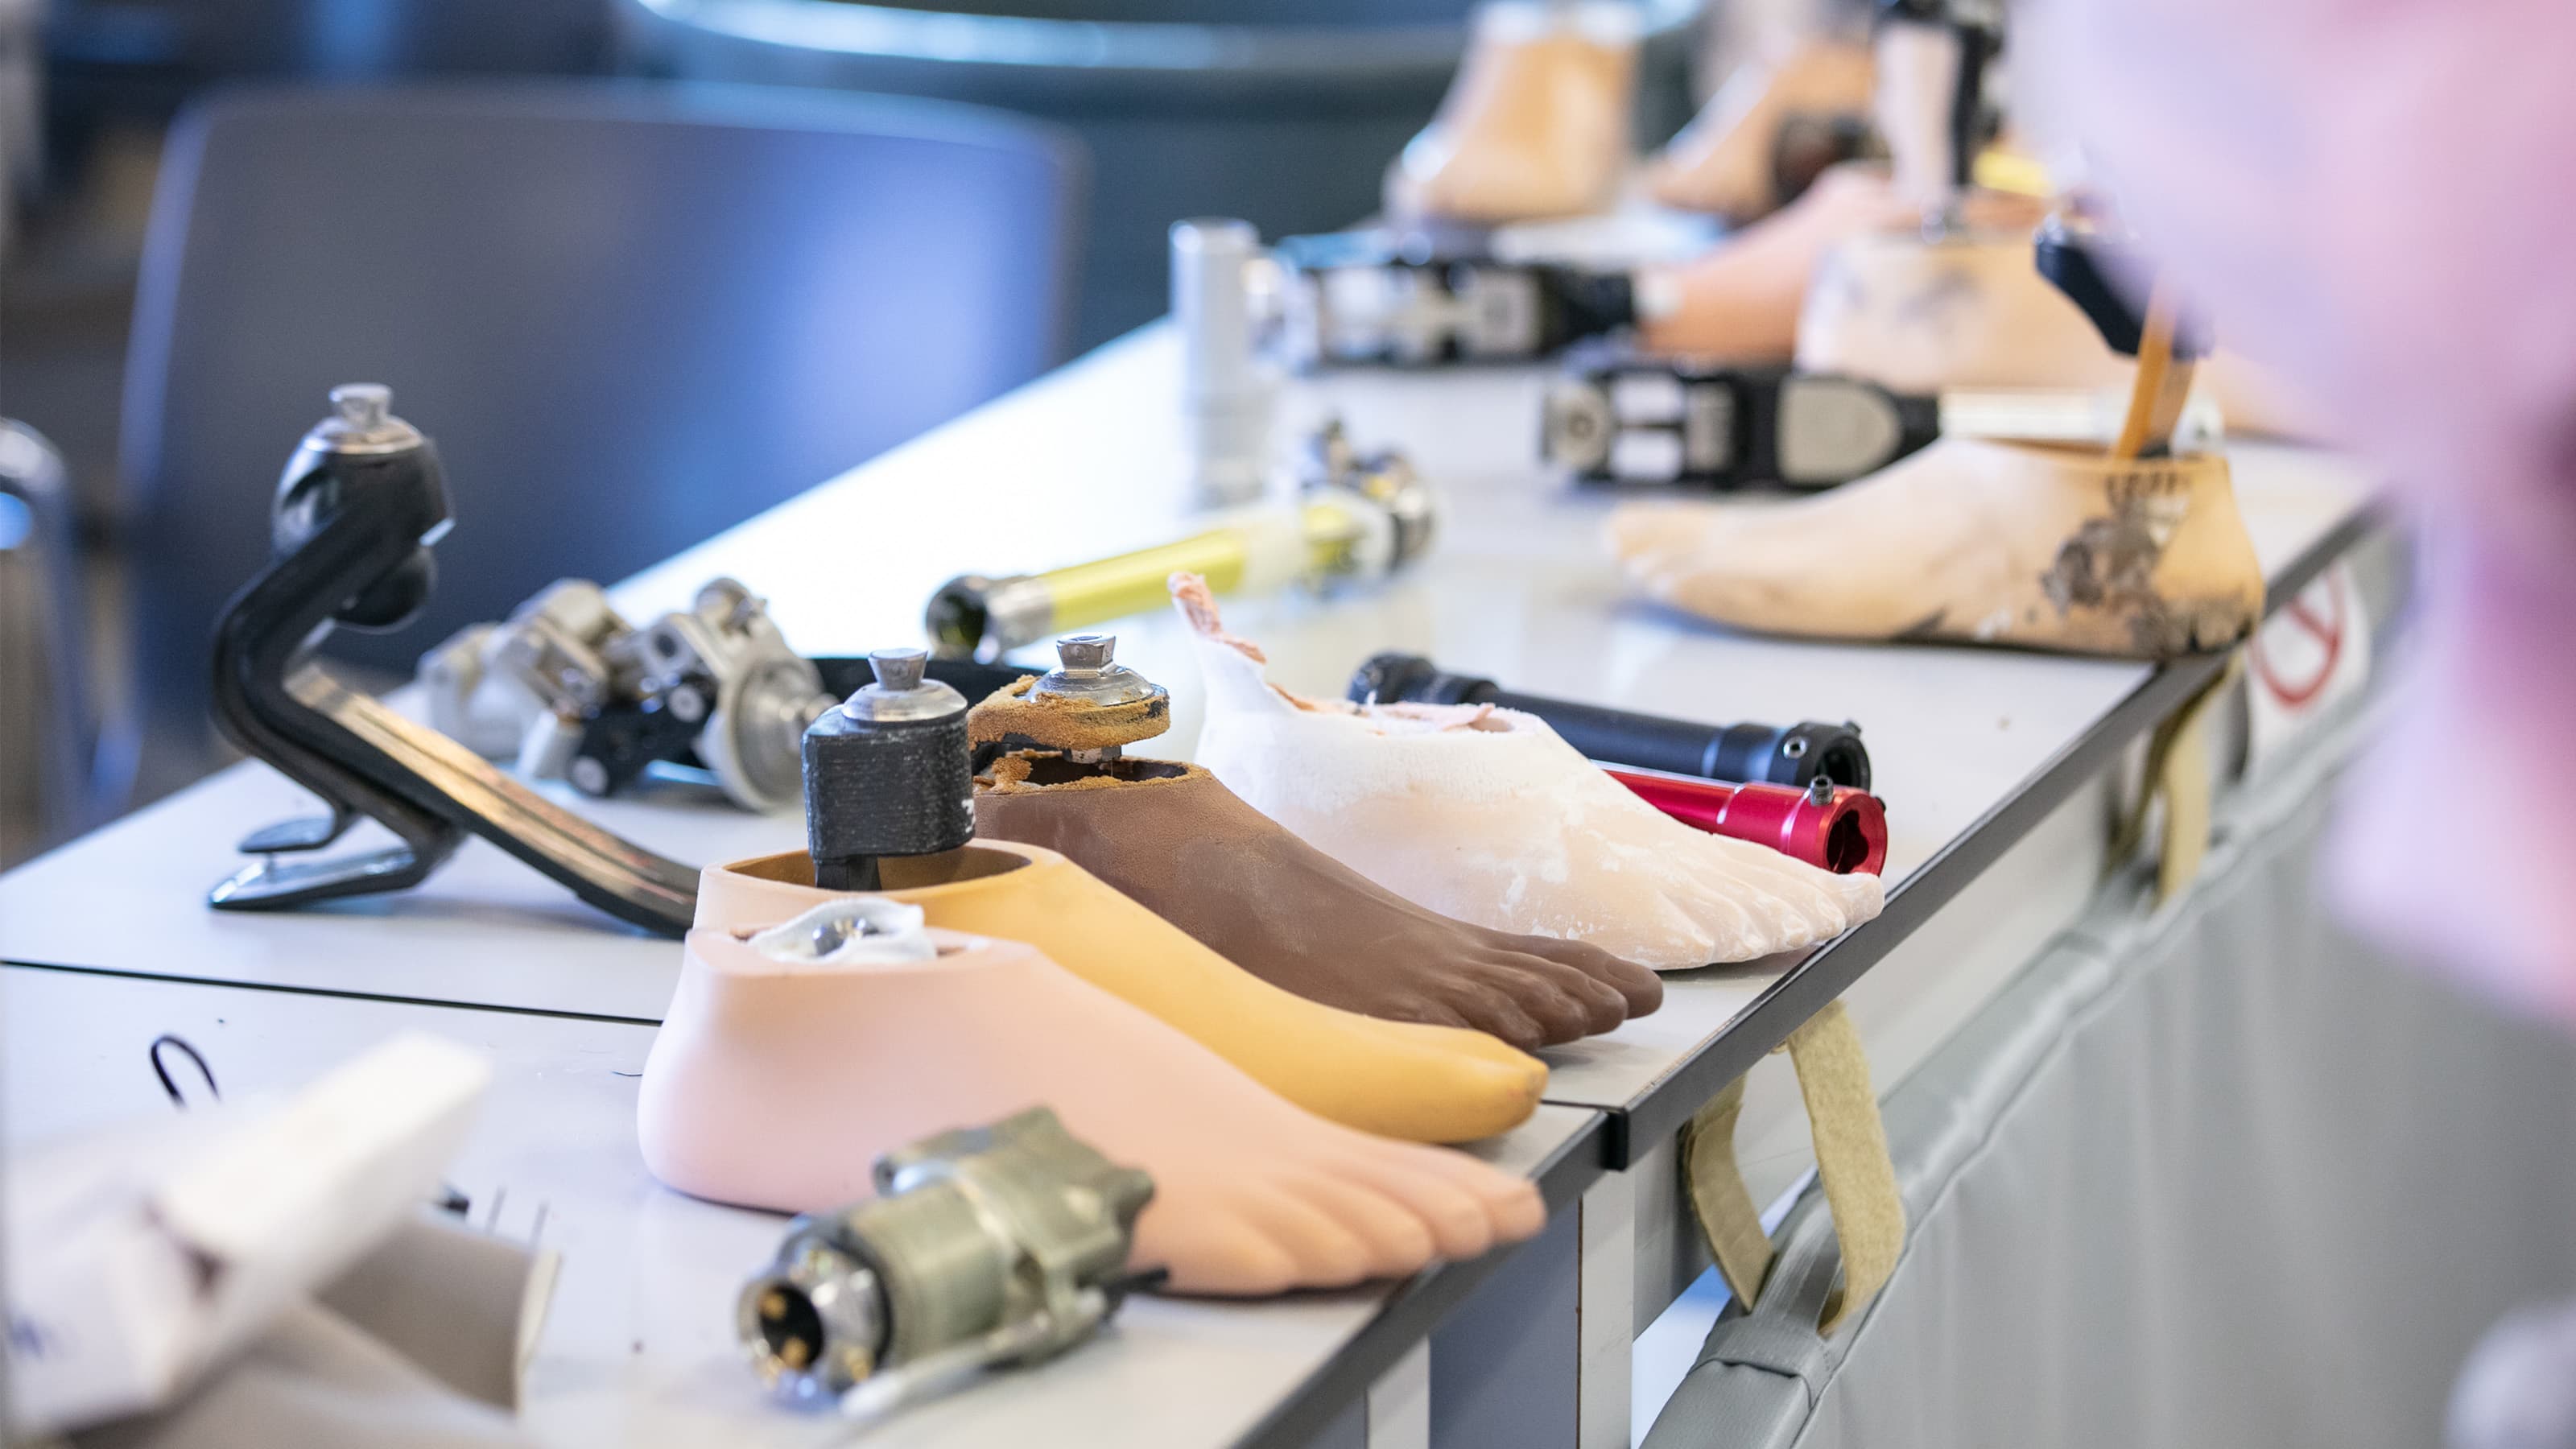 Prosthetic feet and other devices sitting on a table